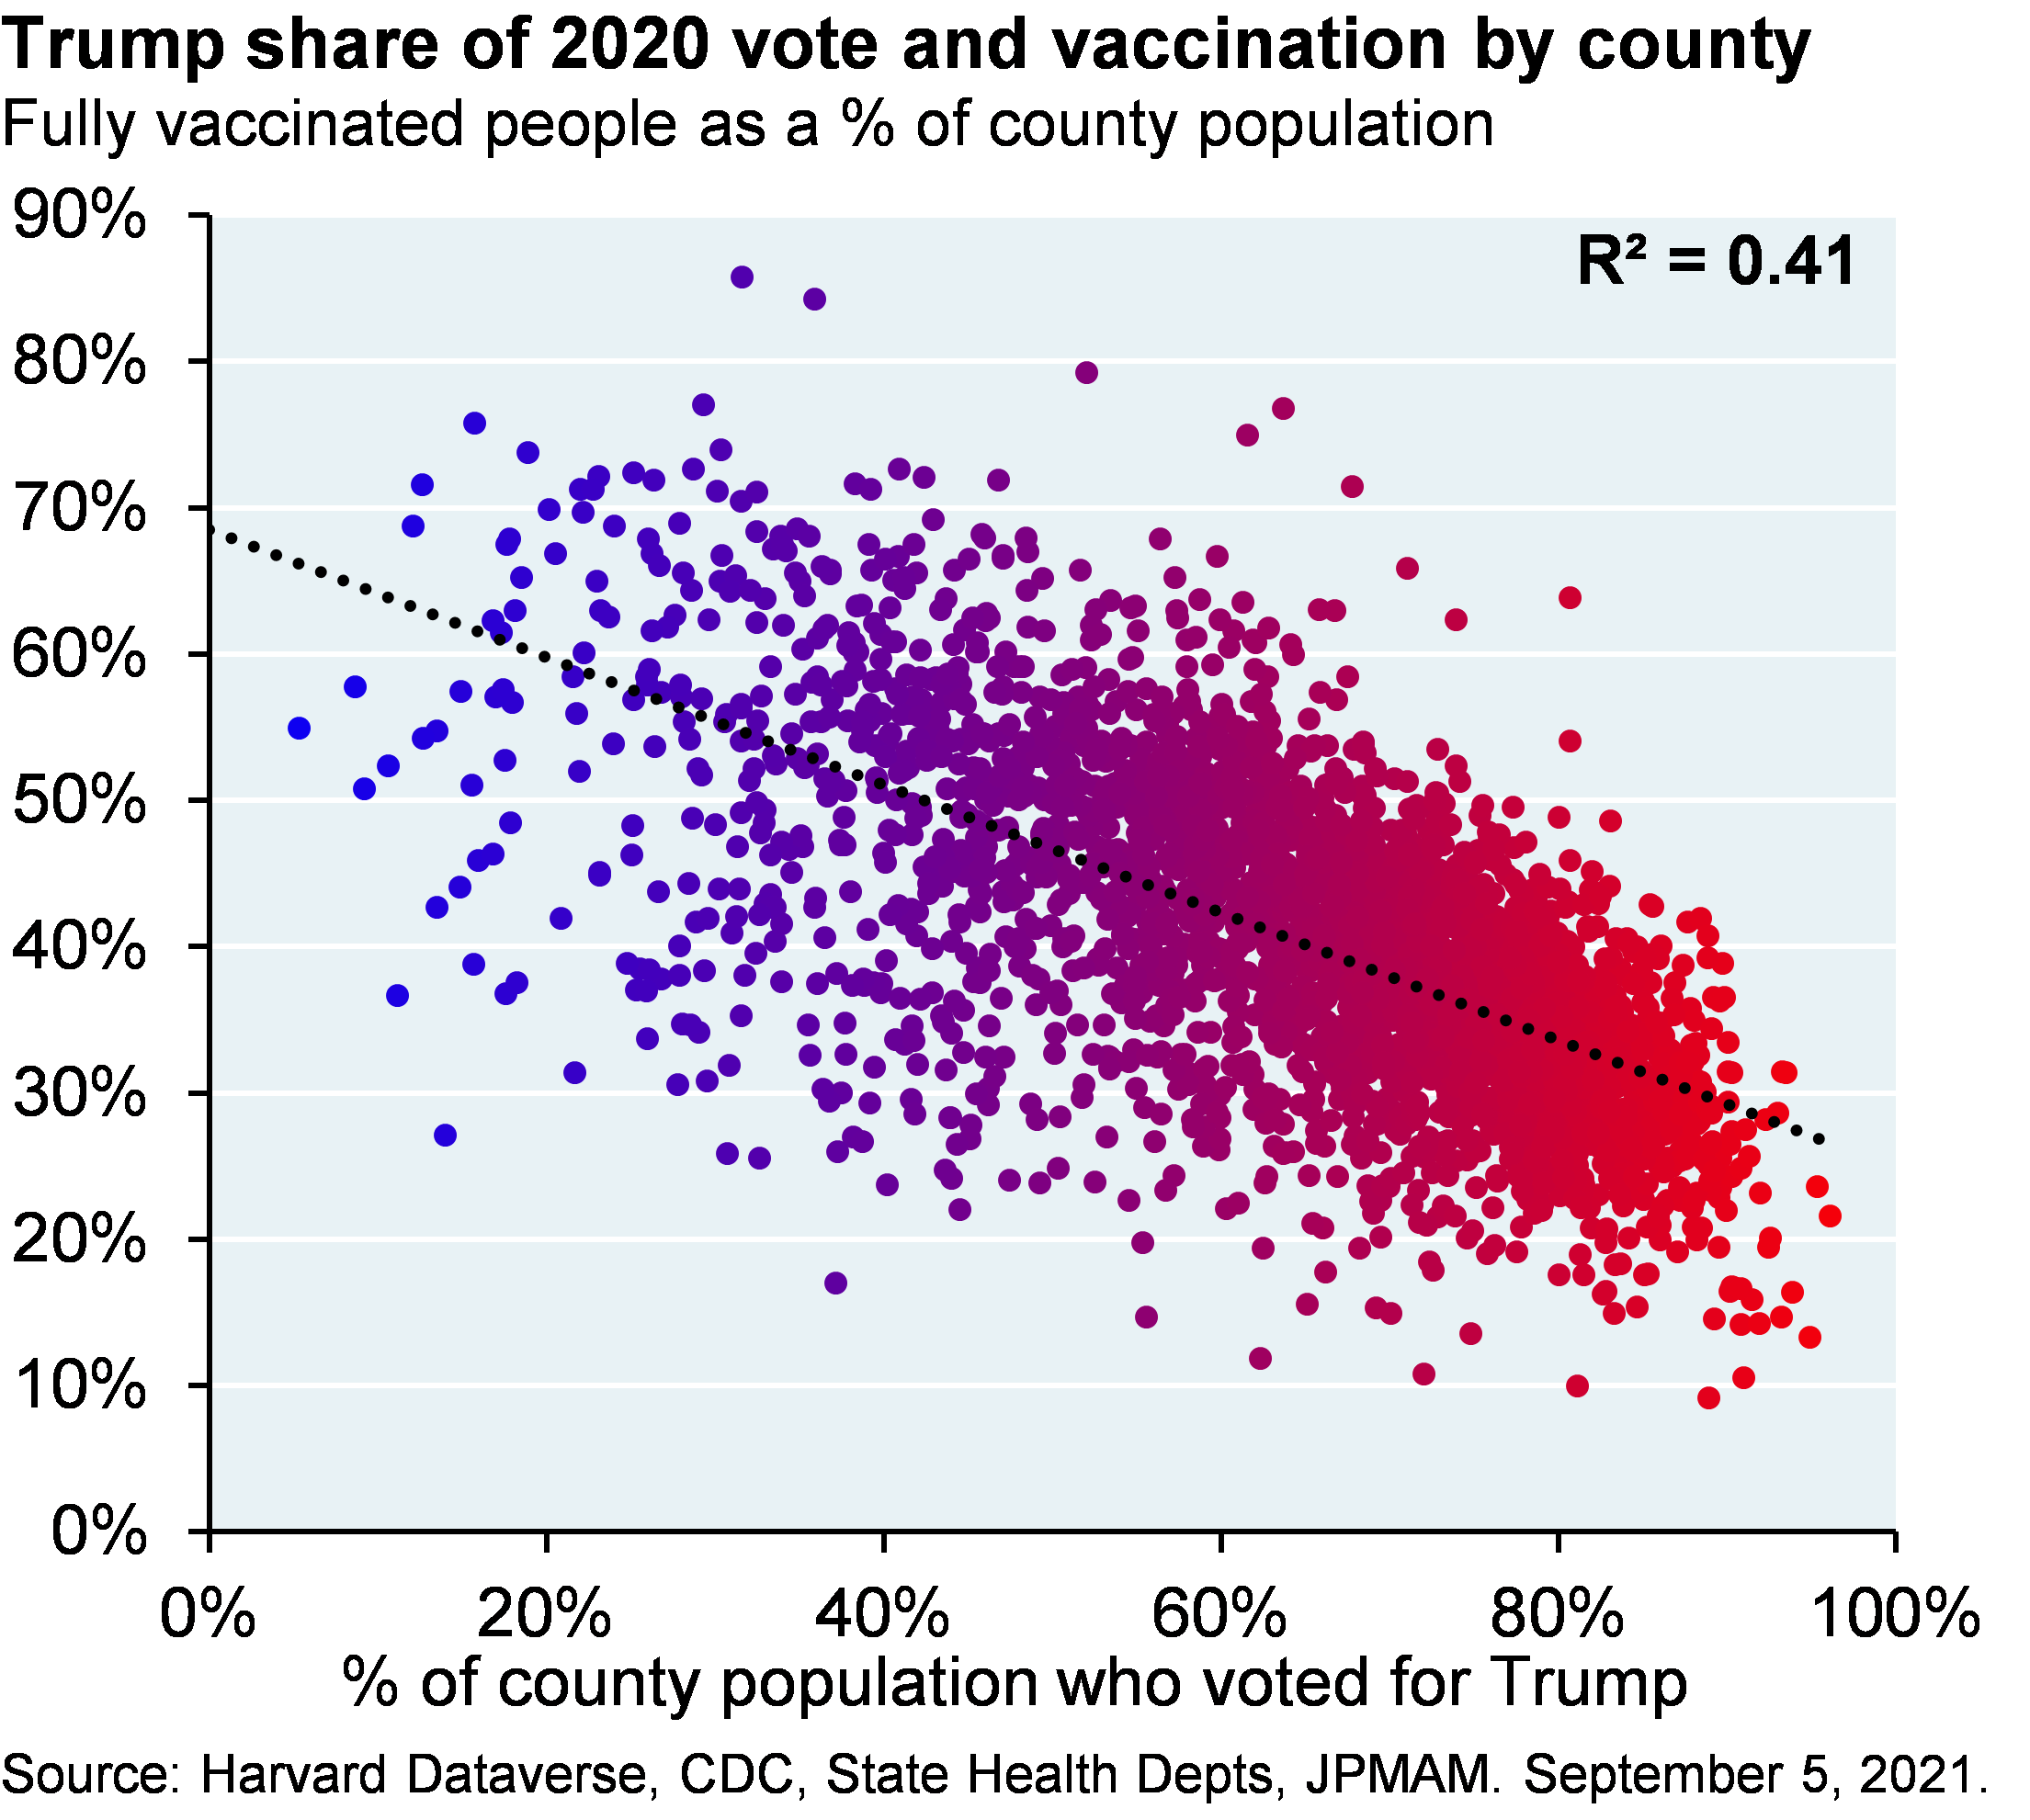 Scatter plot shows fully vaccinated people as a percentage of population vs the percentage of the population who voted for Trump, where each dot represents a US county. The dots illustrate that counties with more Trump voters tend to have lower vaccination rates.